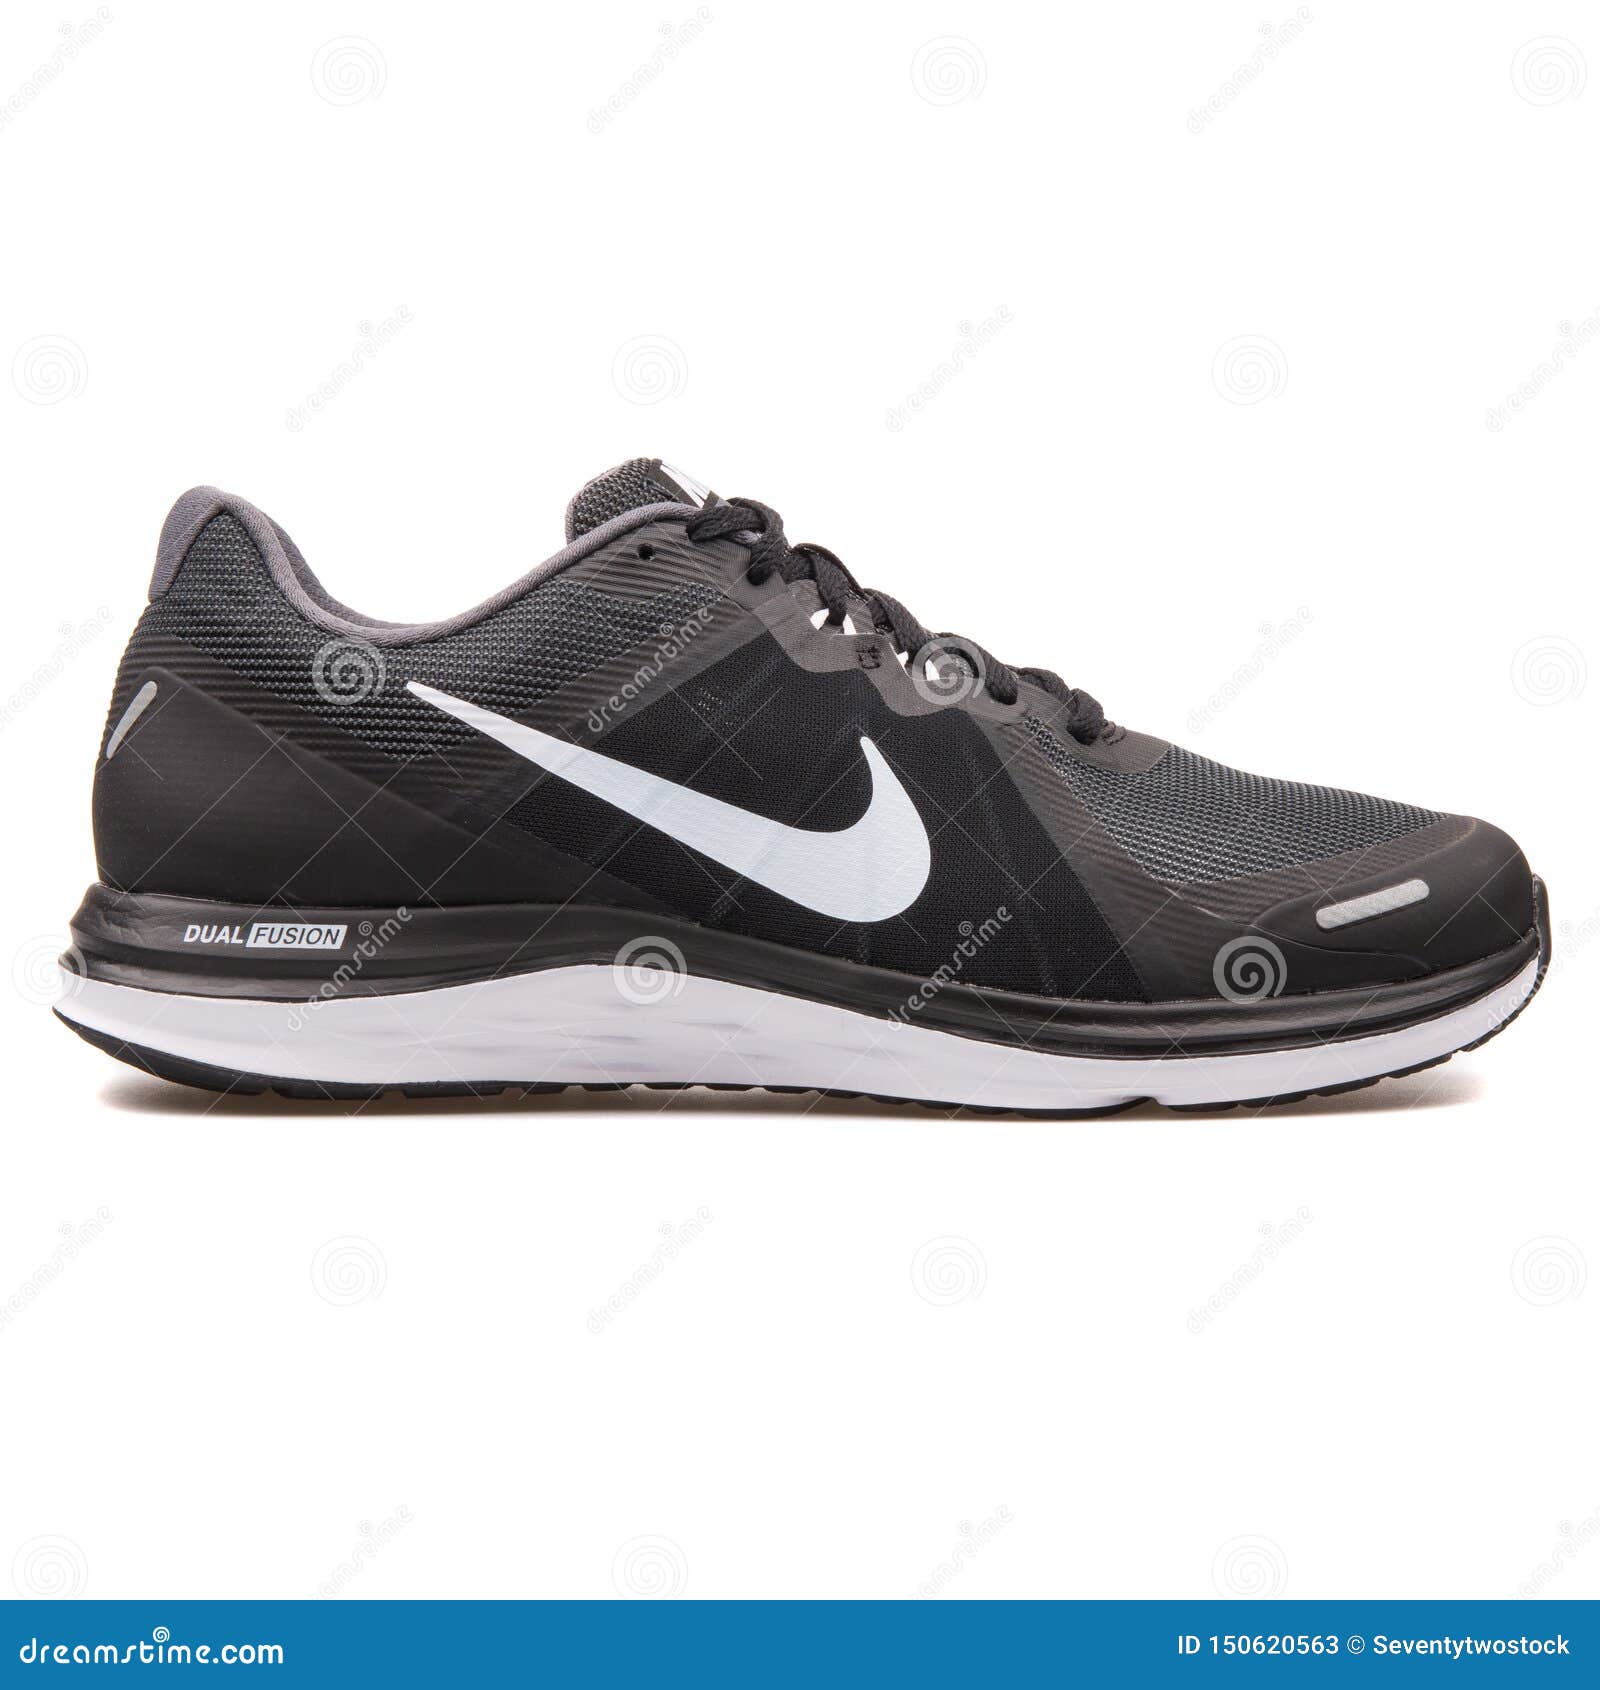 Nike Dual Fusion X 2 Black and White Sneaker Editorial Stock Photo - Image  of casual, dual: 150620563